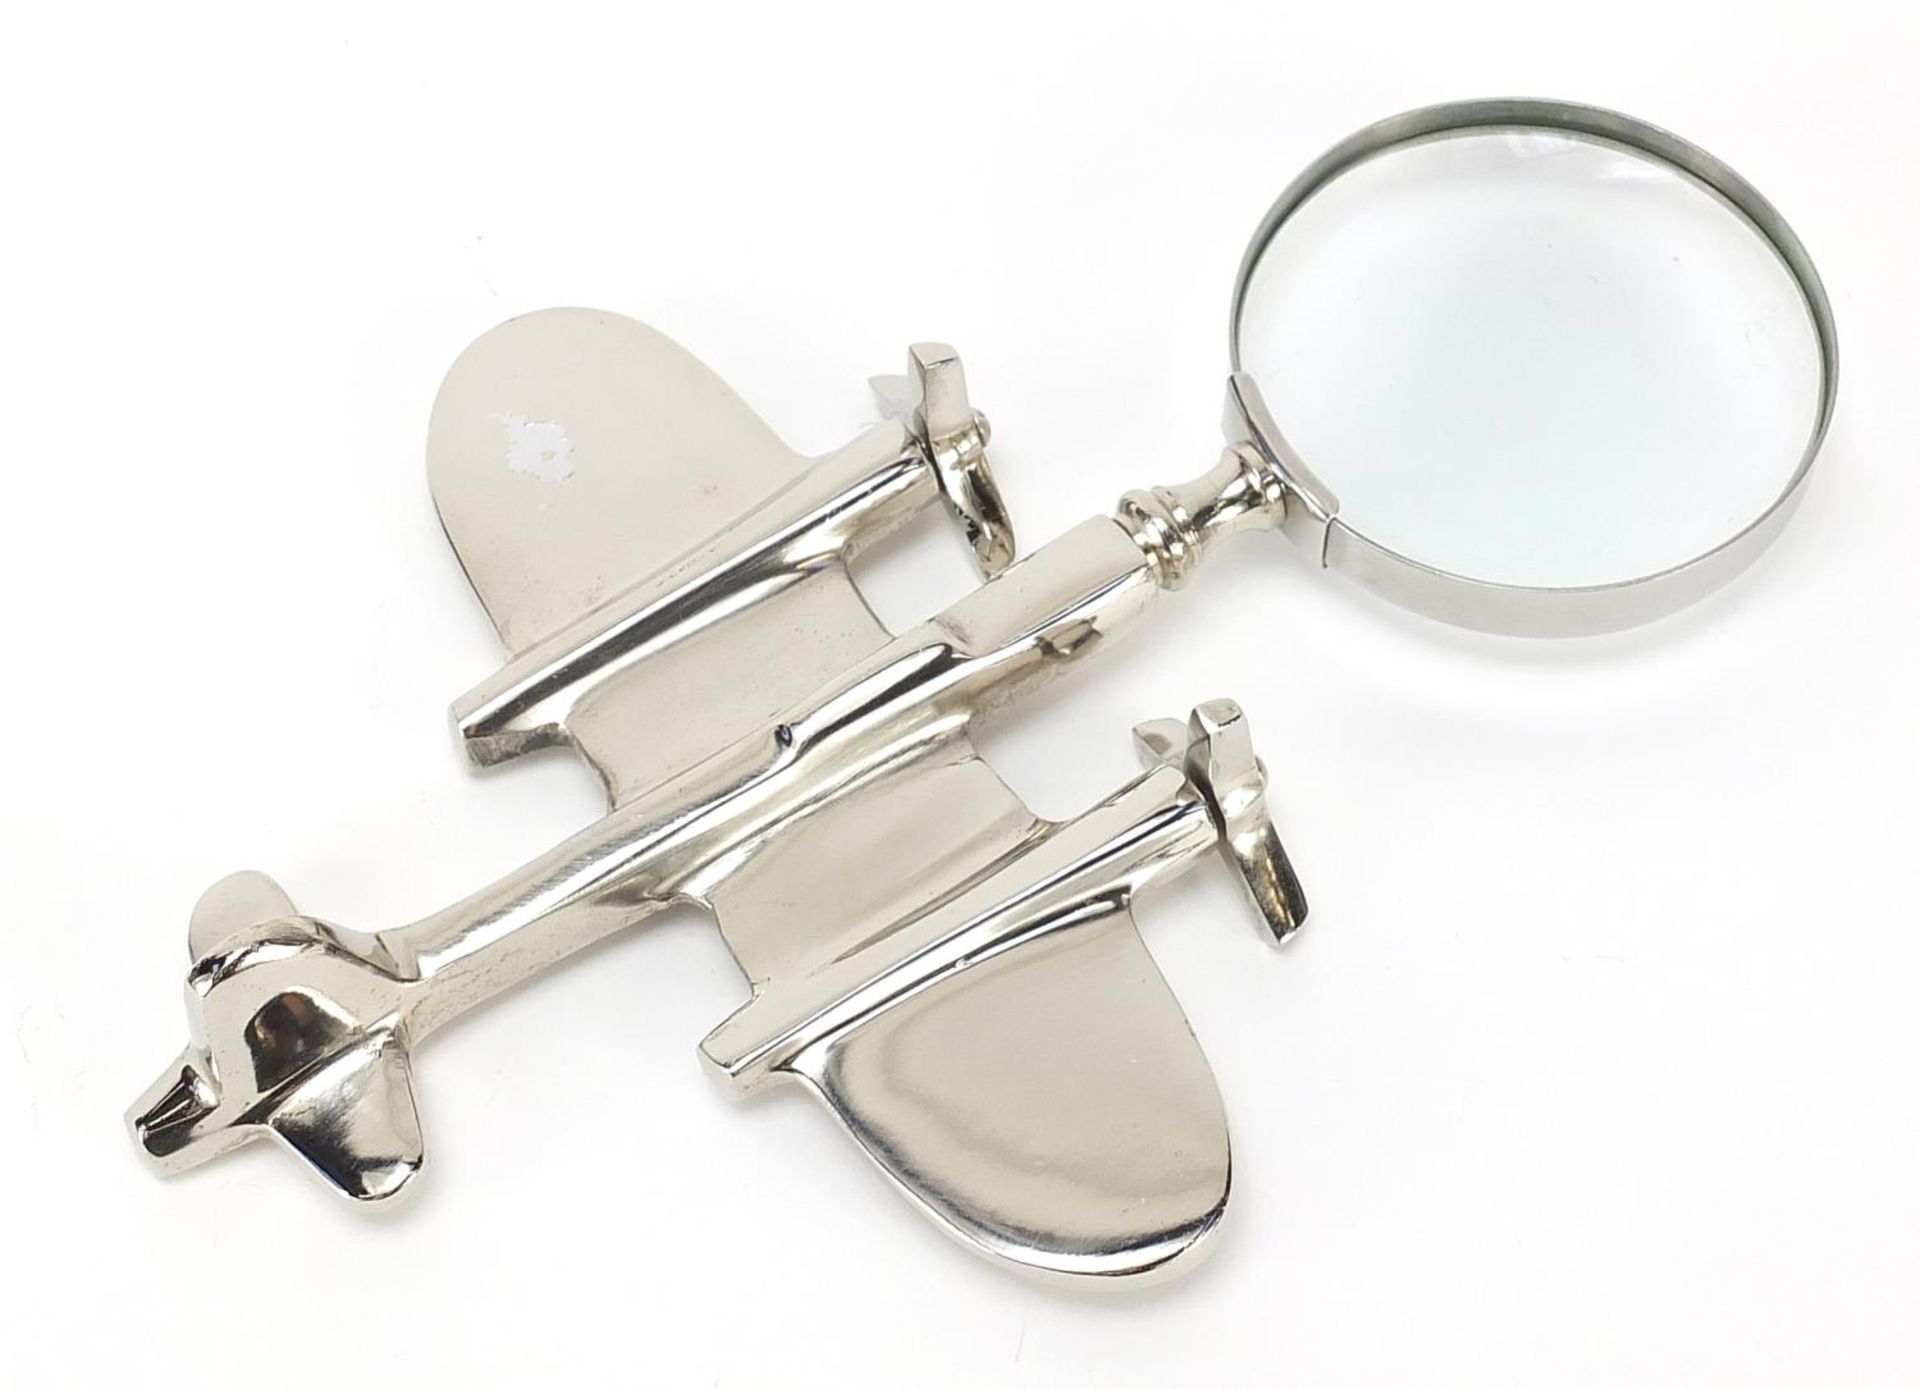 Novelty silver plated magnifying glass in the form of an aeroplane, 23.5cm in length For further